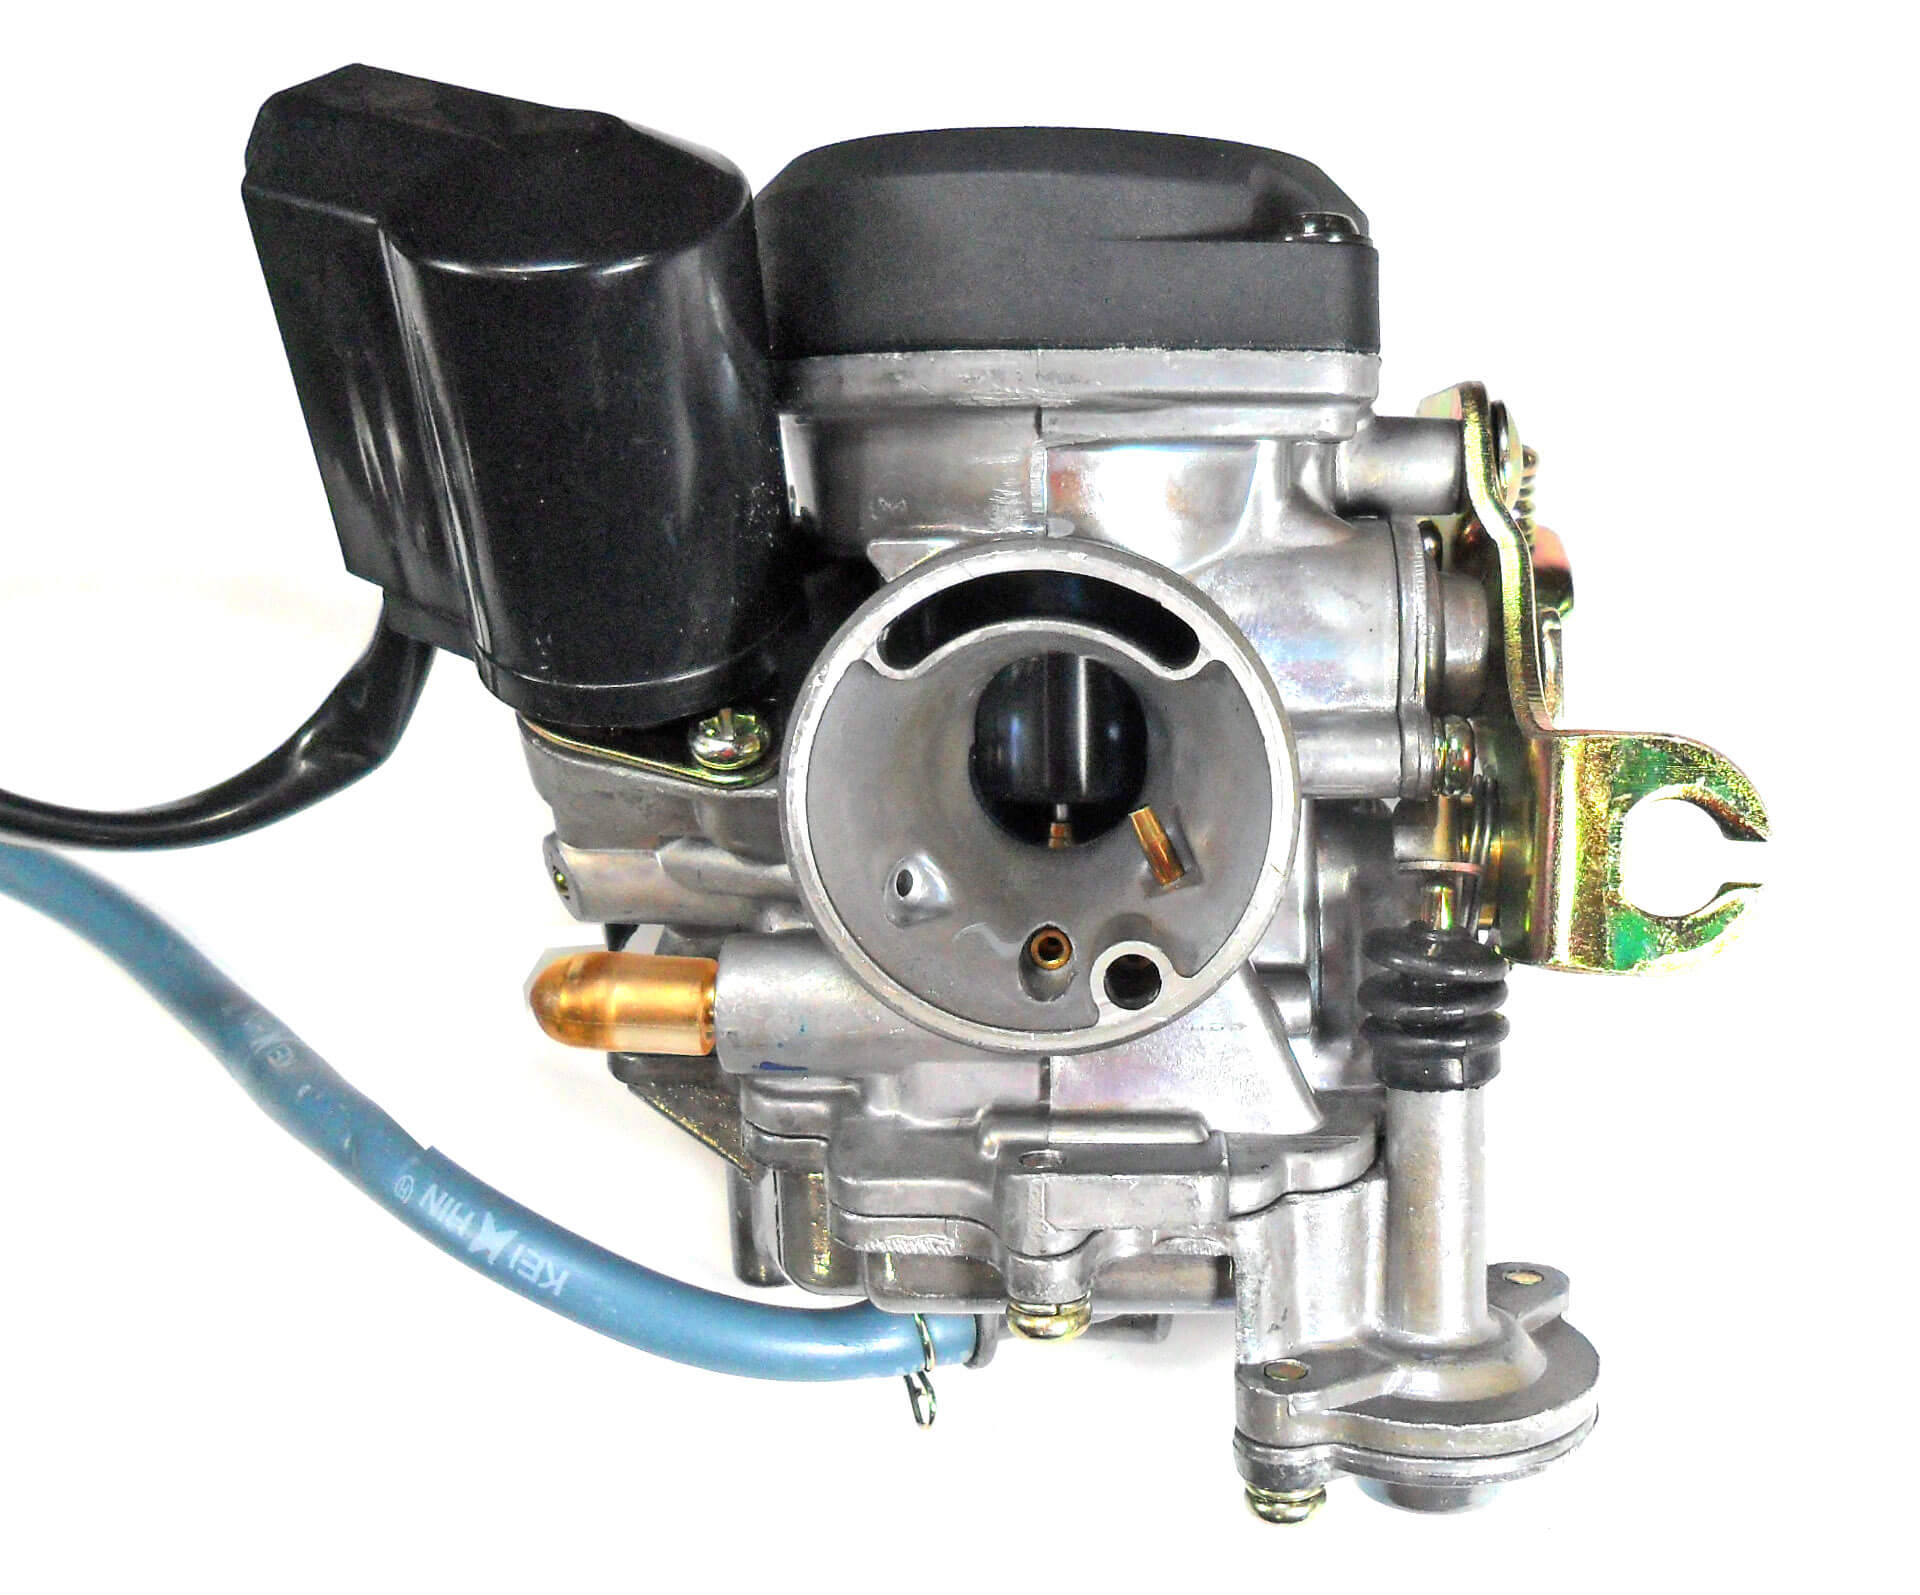 Keihin Style PD18J Carburetor with booster pump TOP QUALITY - Best Value Intake ID=18 OD=28 Air Box OD=38mm Fits Most 49-90cc Scooters With GY6 Belt Drive Motors